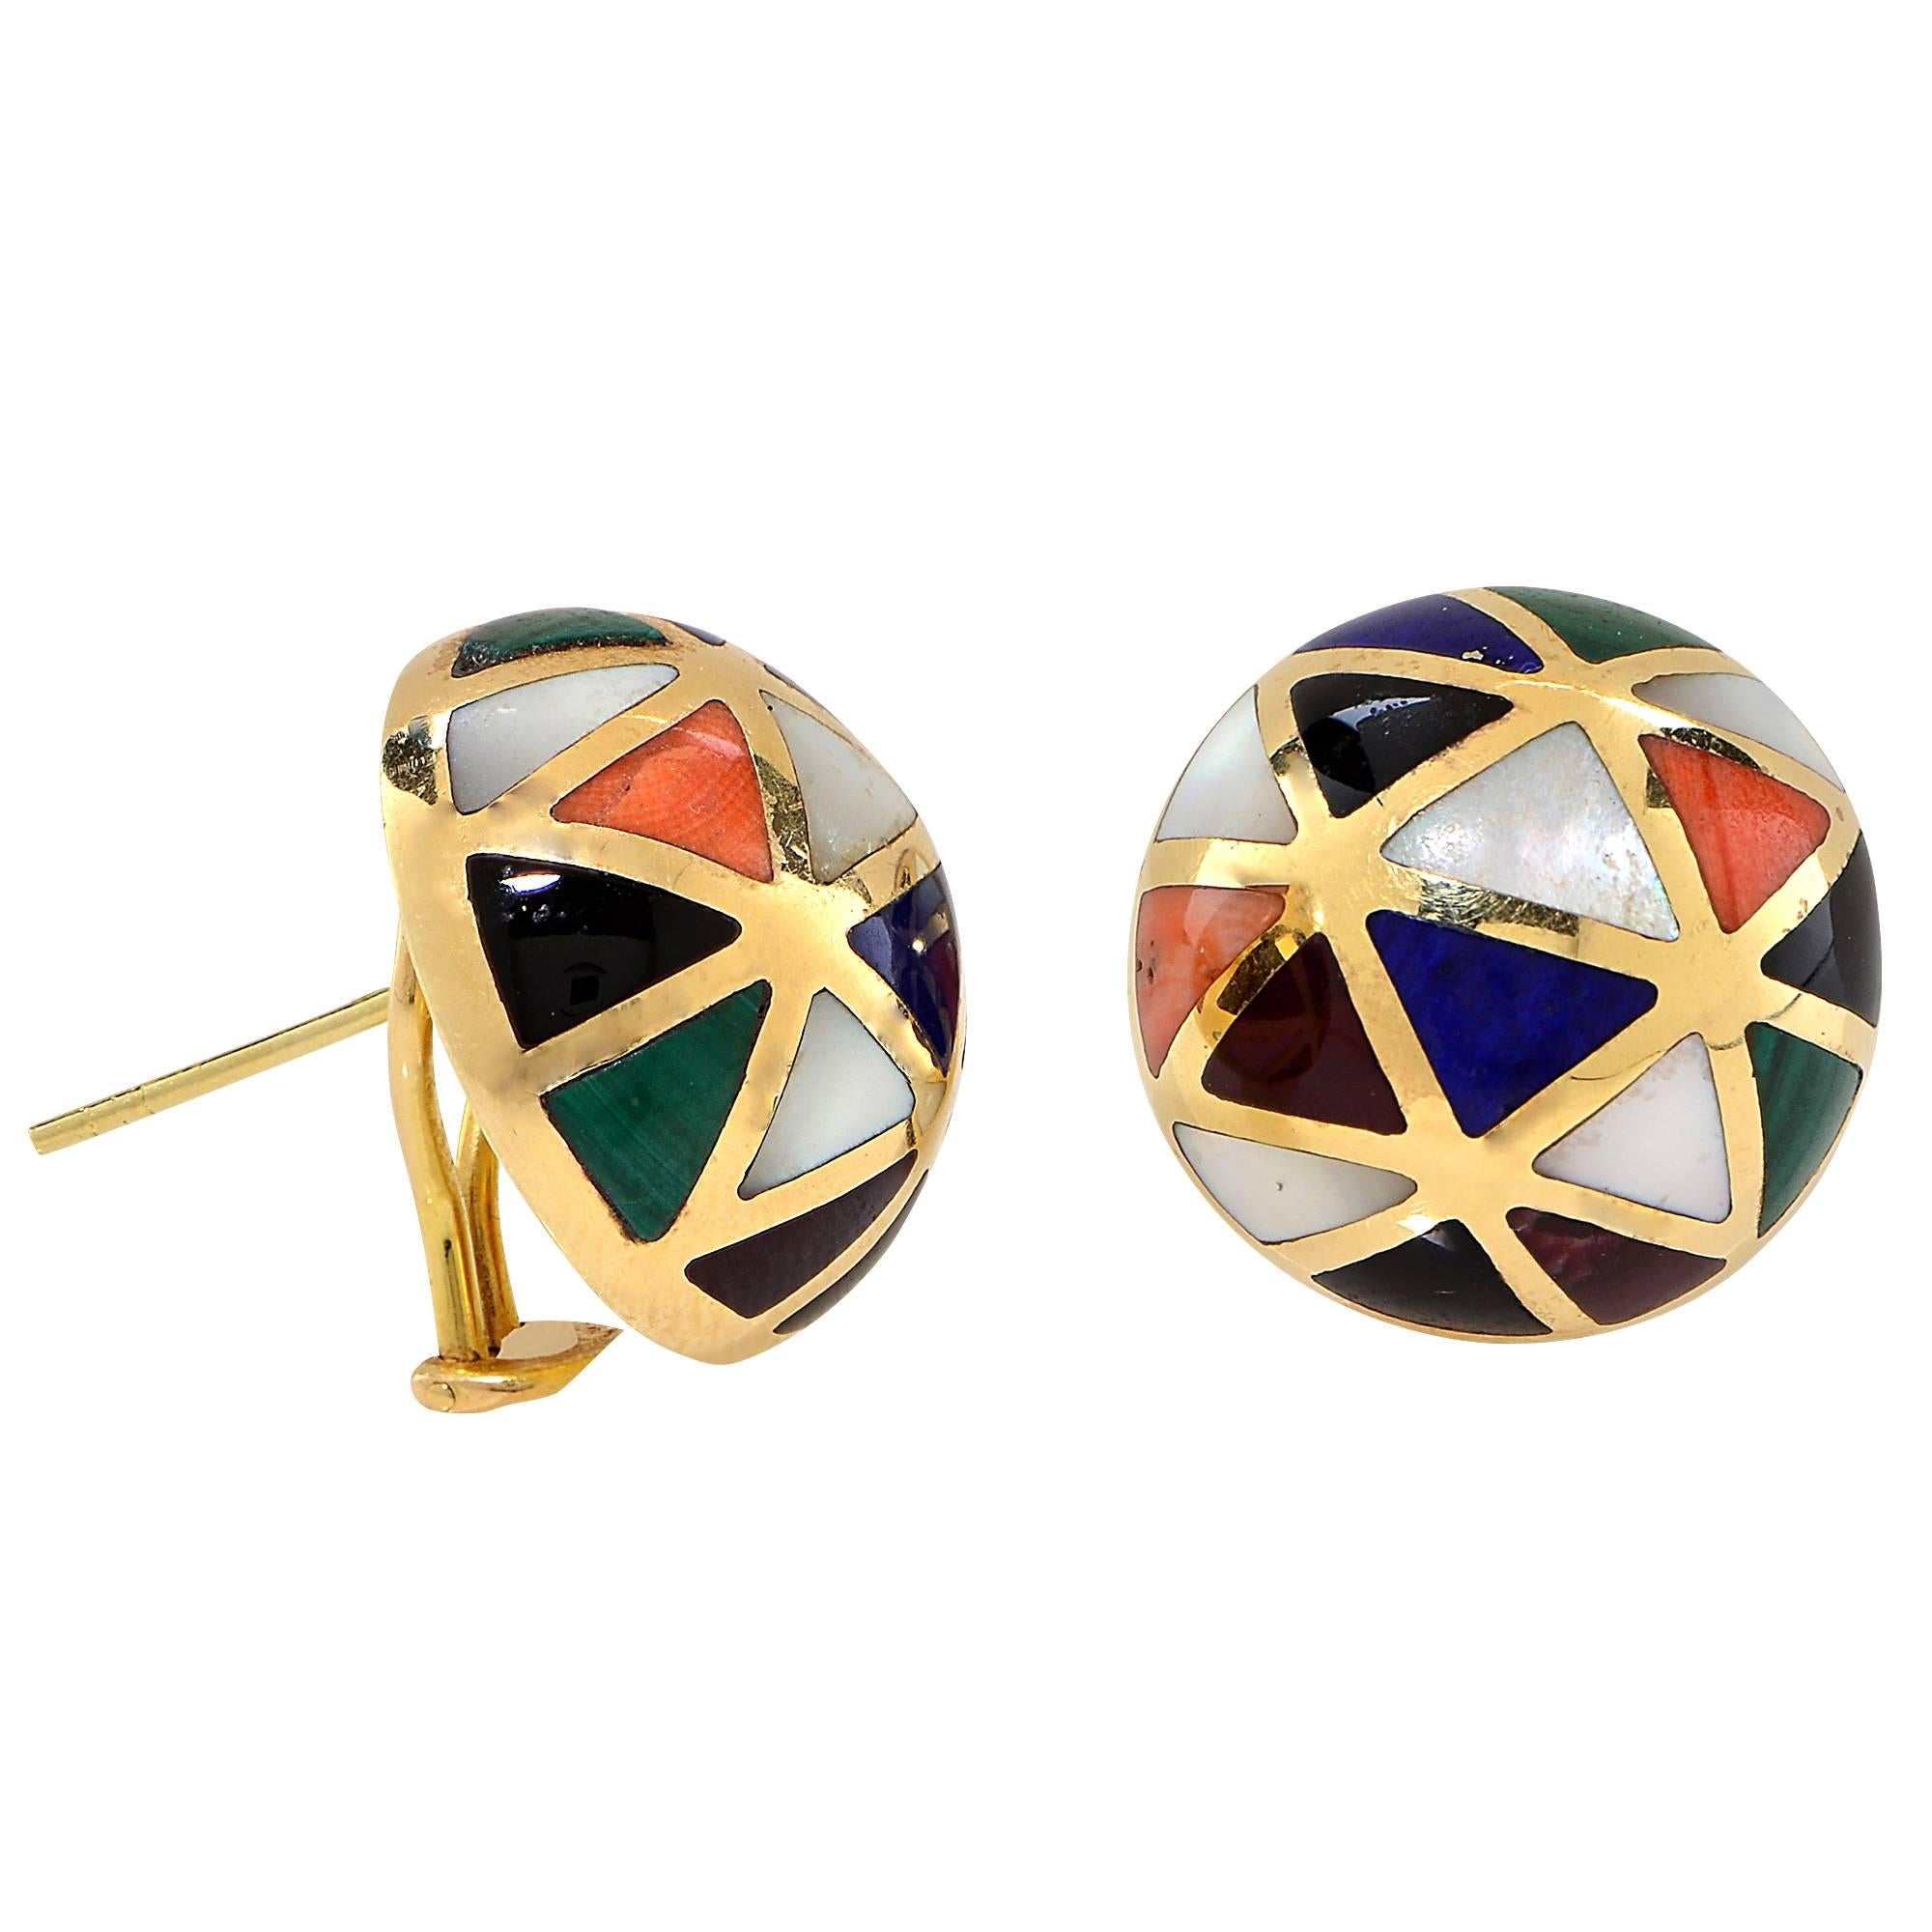 Asch Grossbardt Earrings Featuring Triangular Cut Semiprecious Stones Inlaid in 14 Karat Yellow Gold.

Weight: 13.21 grams

These Earrings are Accompanied by a Retail Appraisal Performed by an Accredited Gemologist.